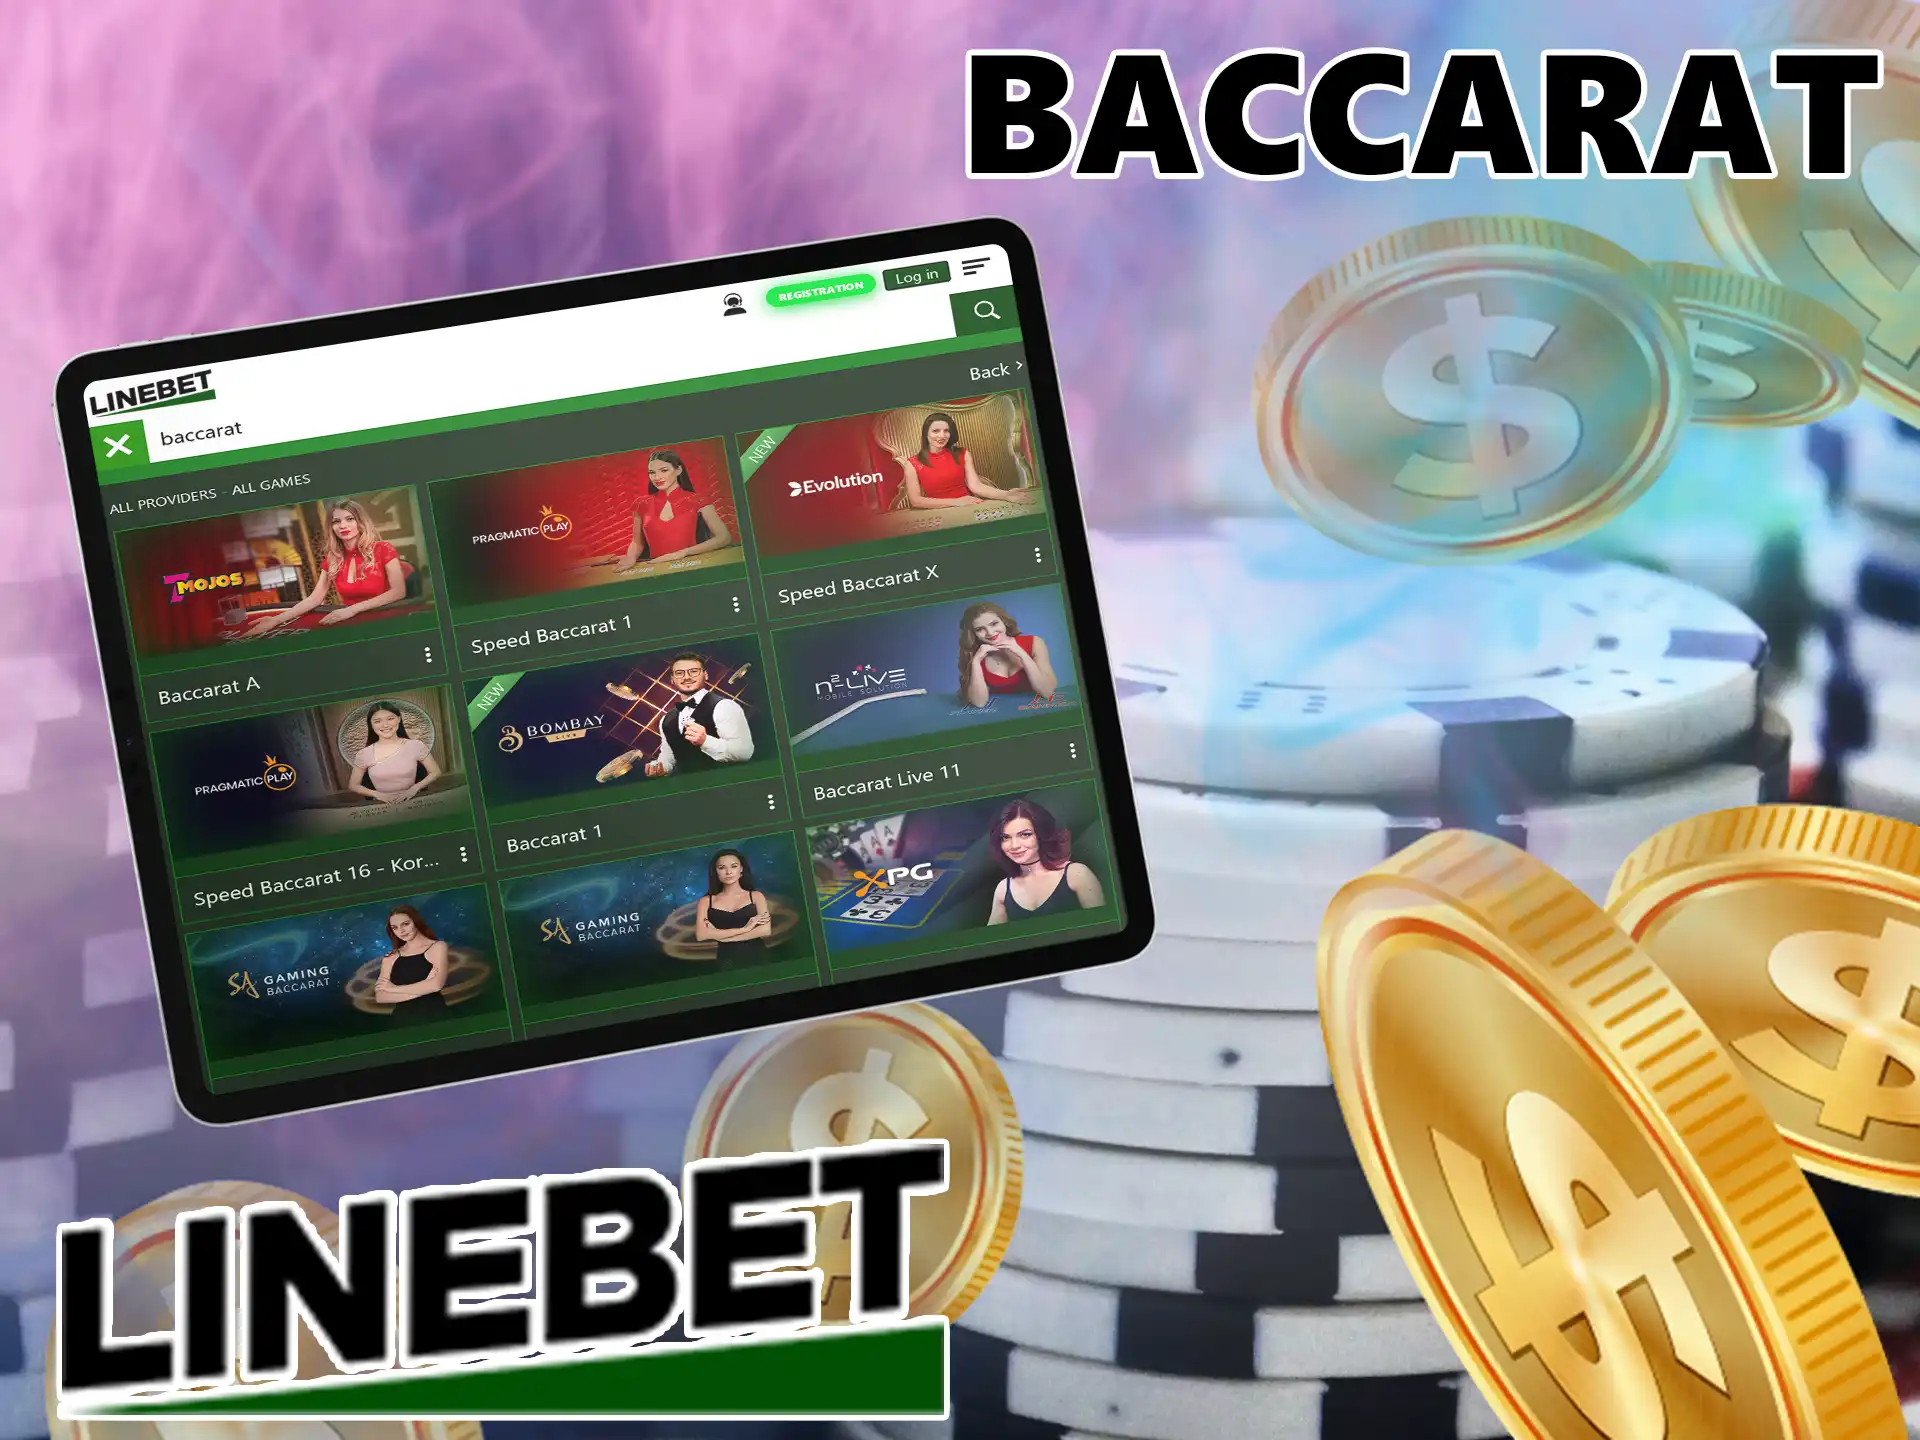 This game is a Linebet Casino classic, and if you don't know the rules yet, you can easily check it out on our website.